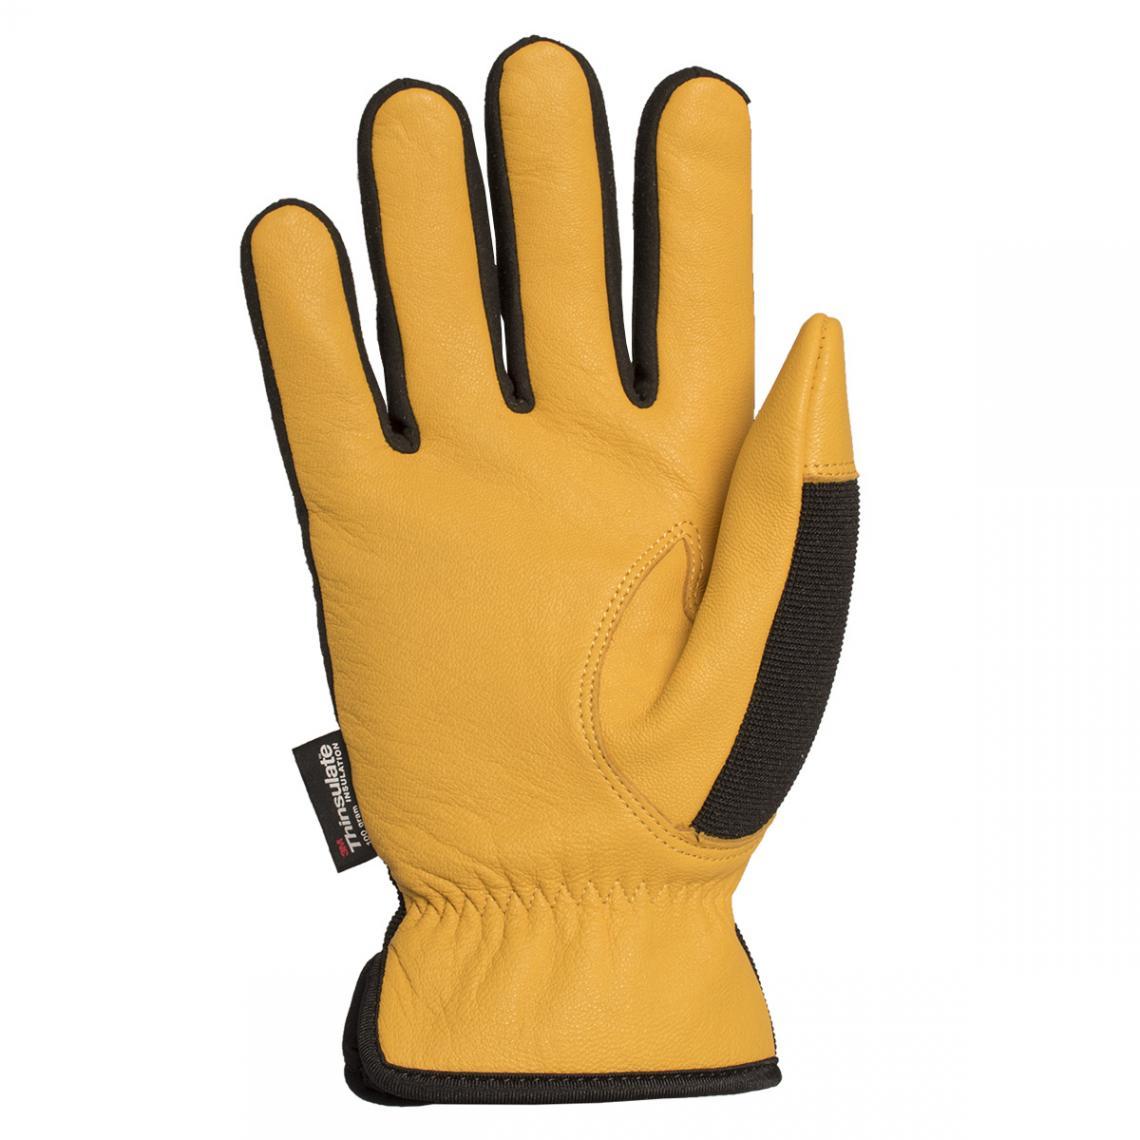 Horizon Thinsulate Lined Goatskin Work Gloves Work Gloves and Hats - Cleanflow